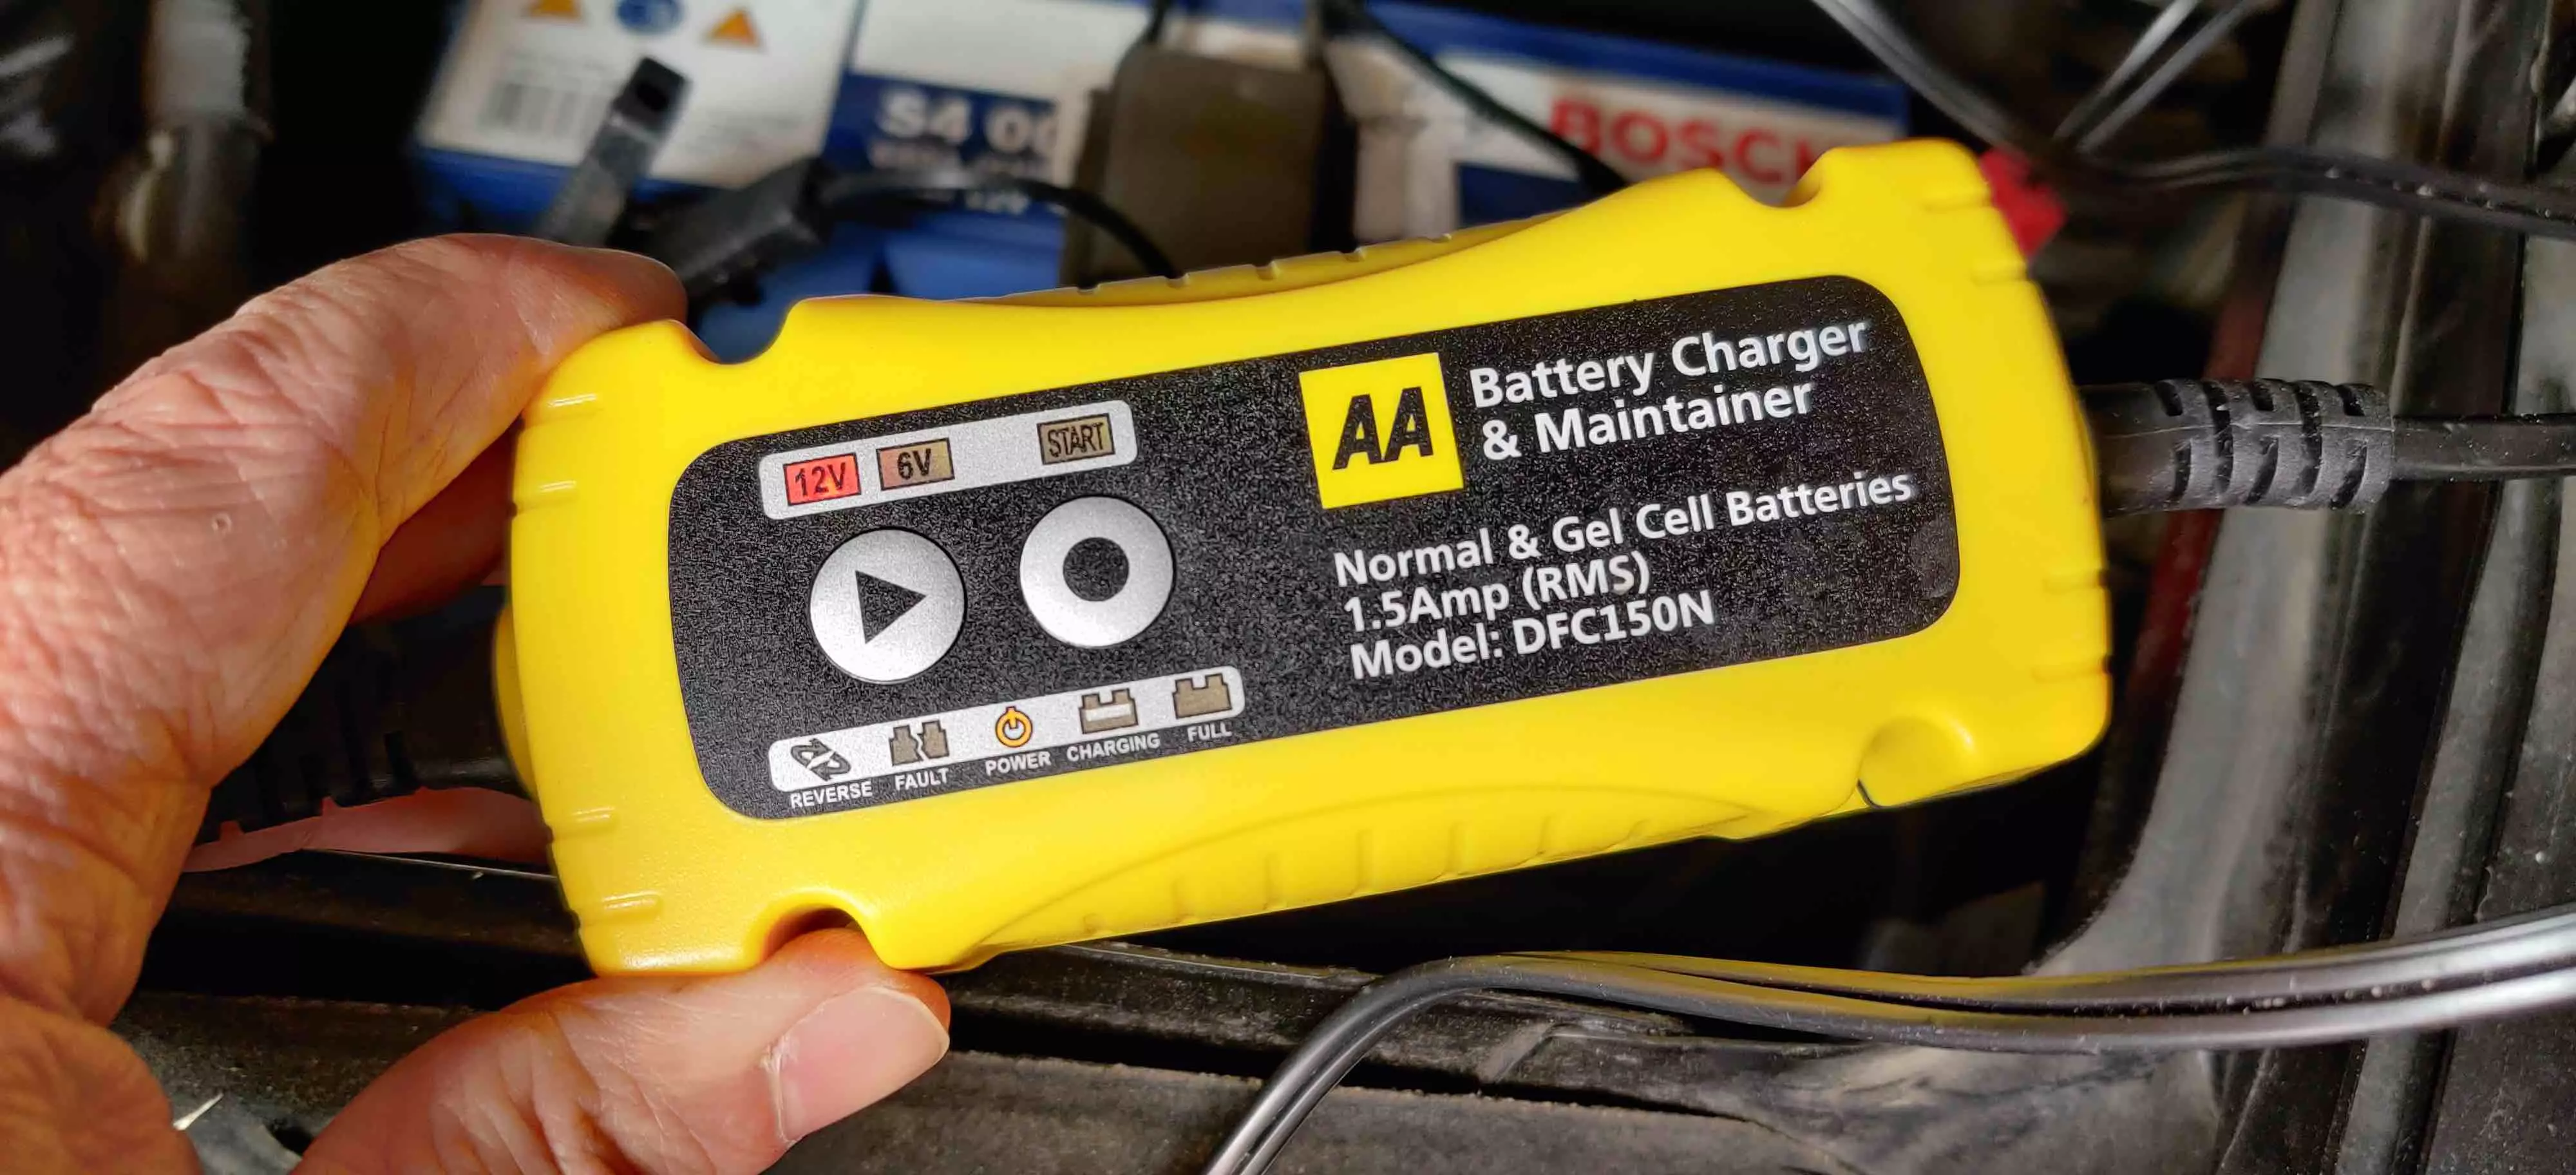 How to charge a car battery at home